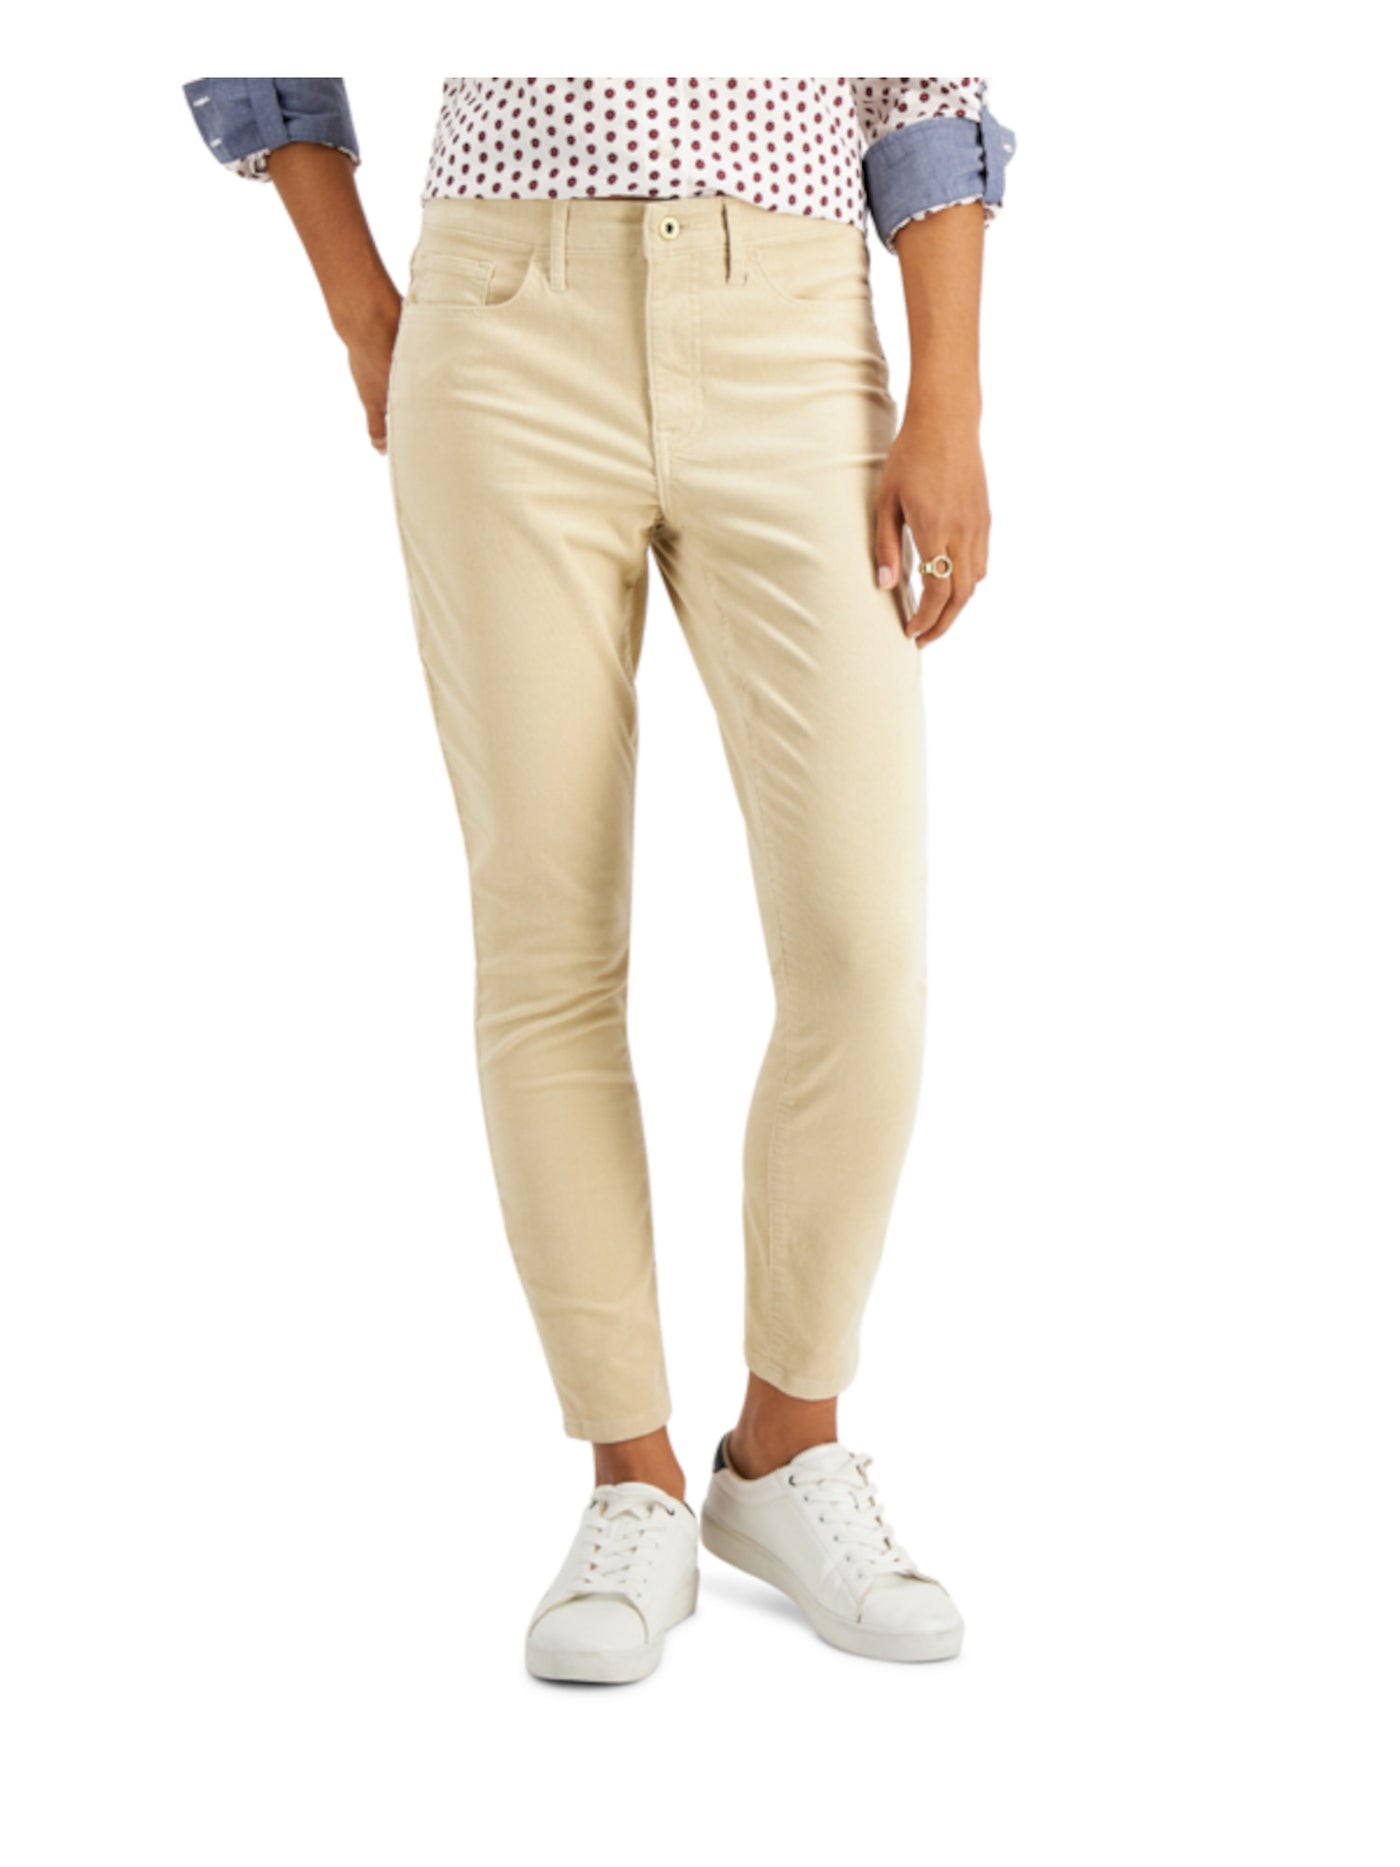 TOMMY HILFIGER Womens Beige Zippered Pocketed Slimming Panel Ankle Length Skinny Pants 2